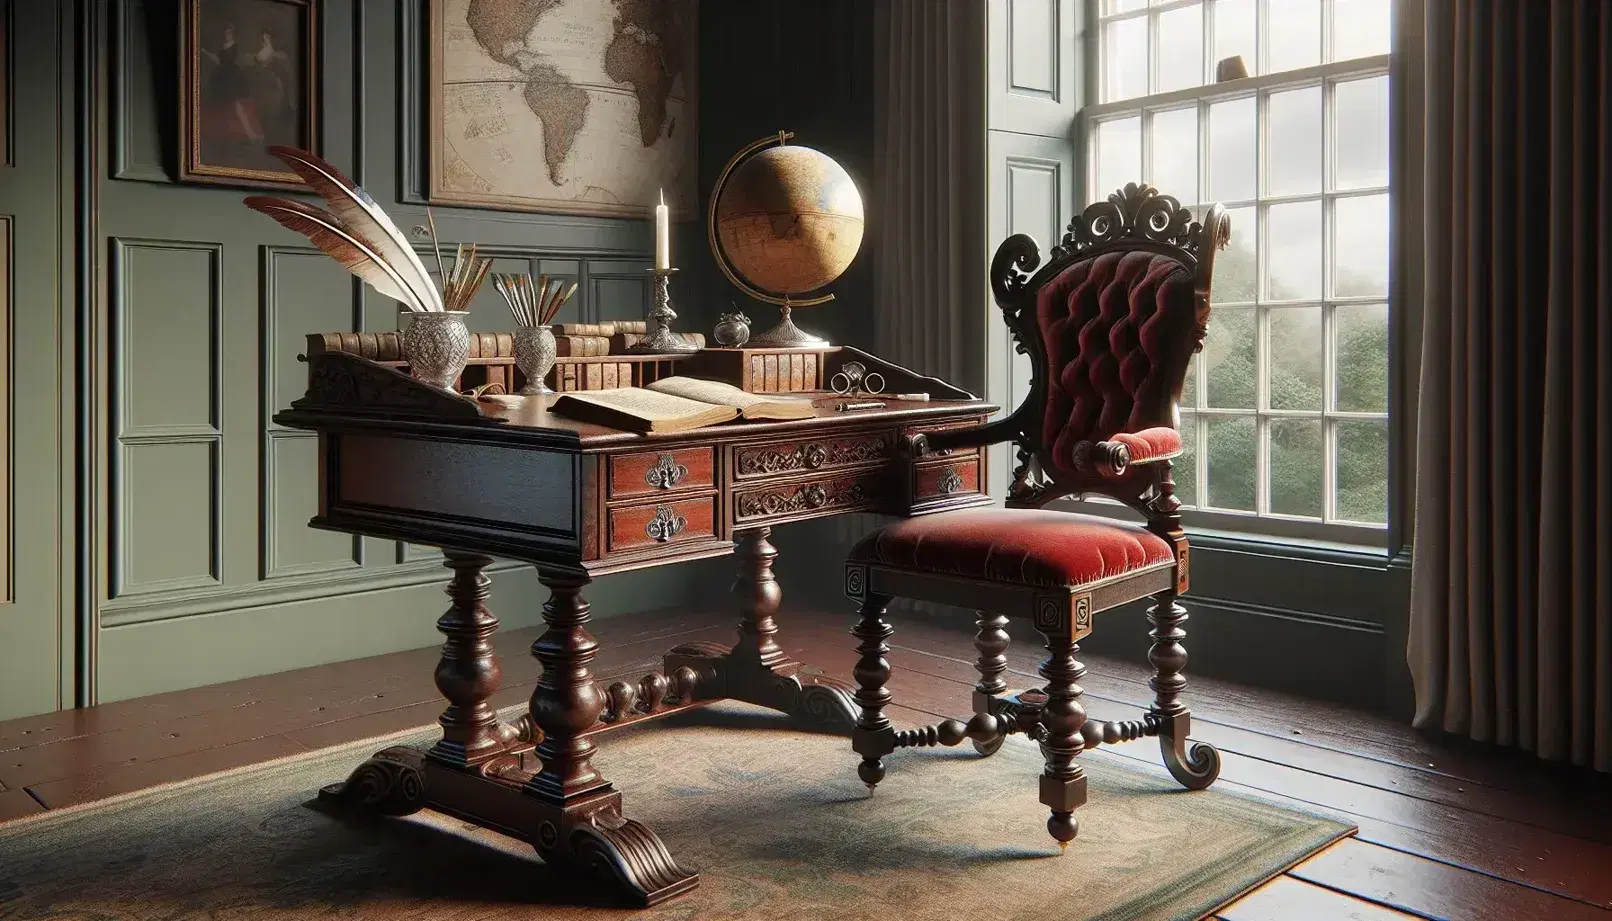 Vintage study with mahogany desk, antique book, inkwell and glasses, padded chair, globe and view of a green garden.